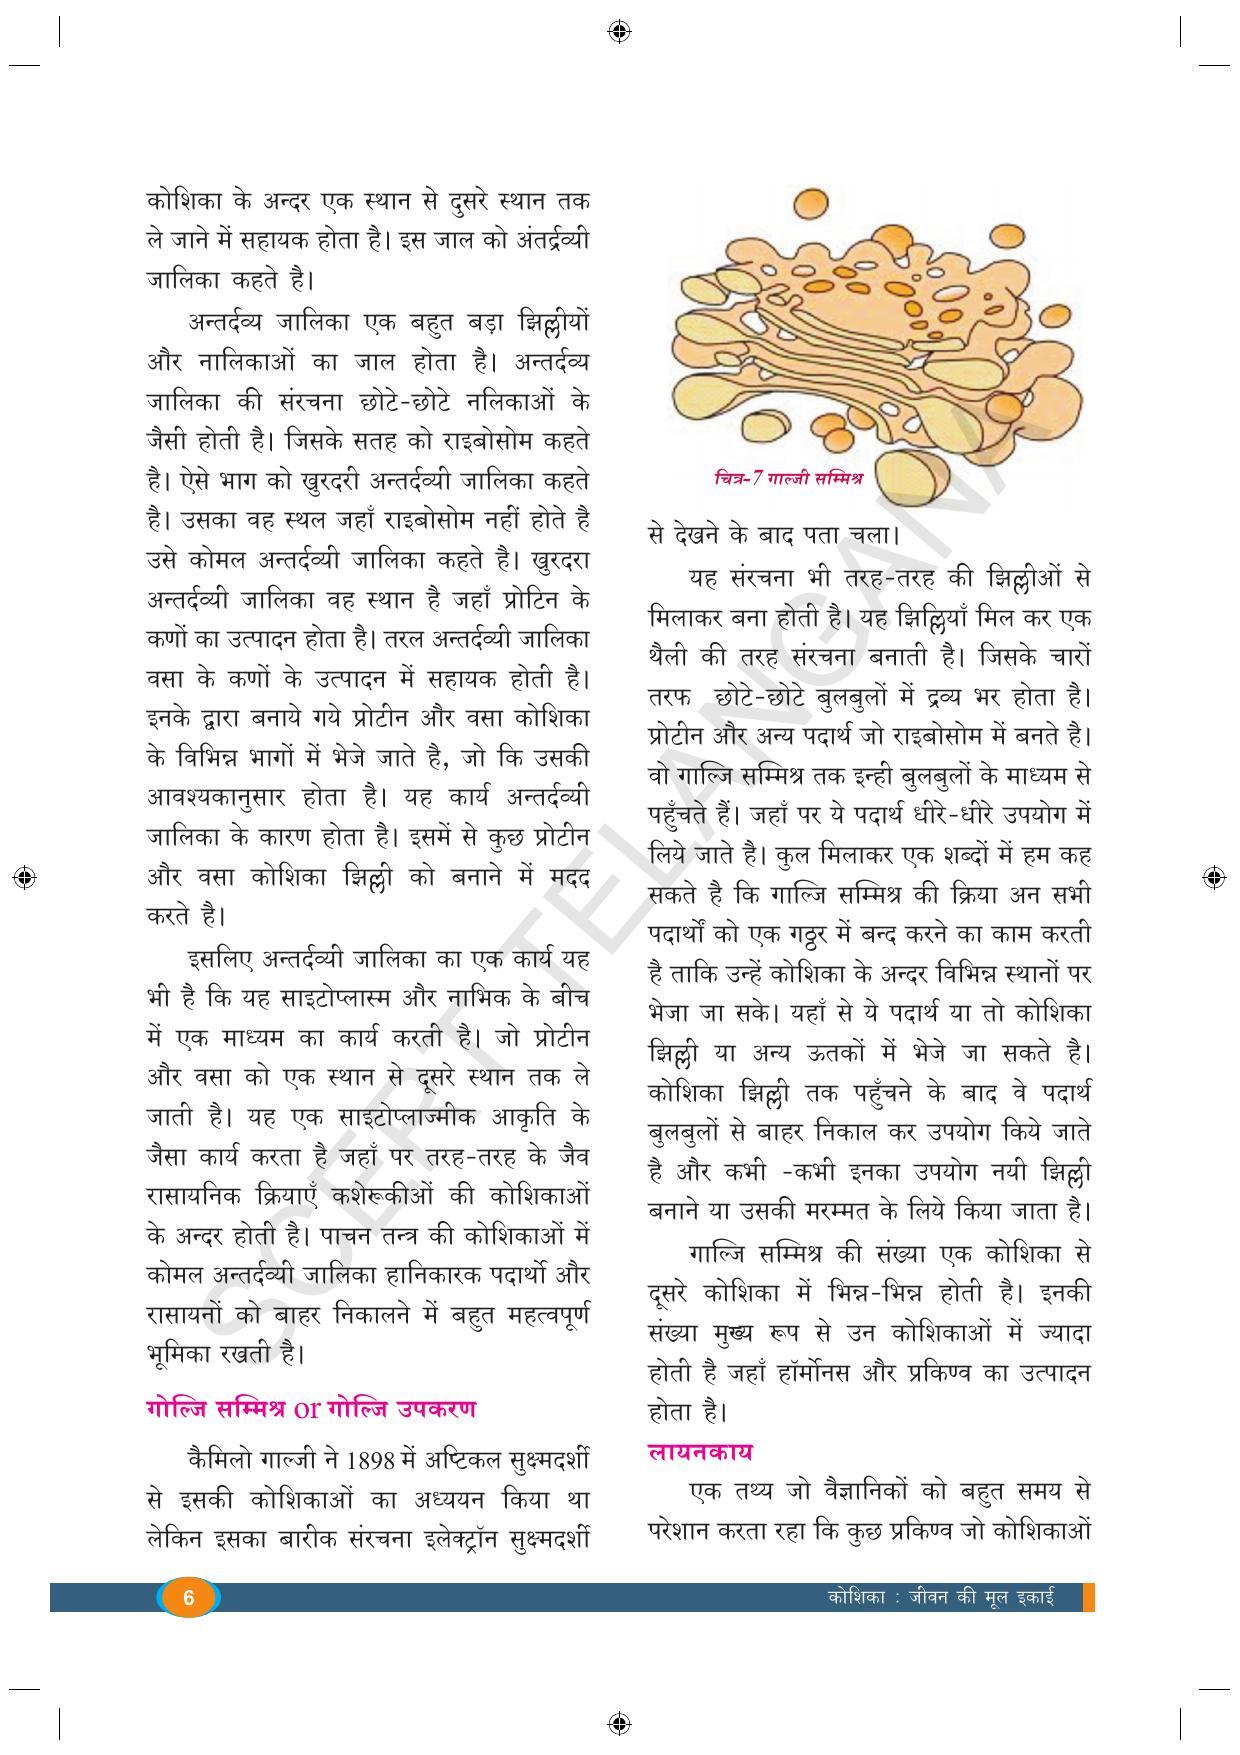 TS SCERT Class 9 Biological Science (Hindi Medium) Text Book - Page 18